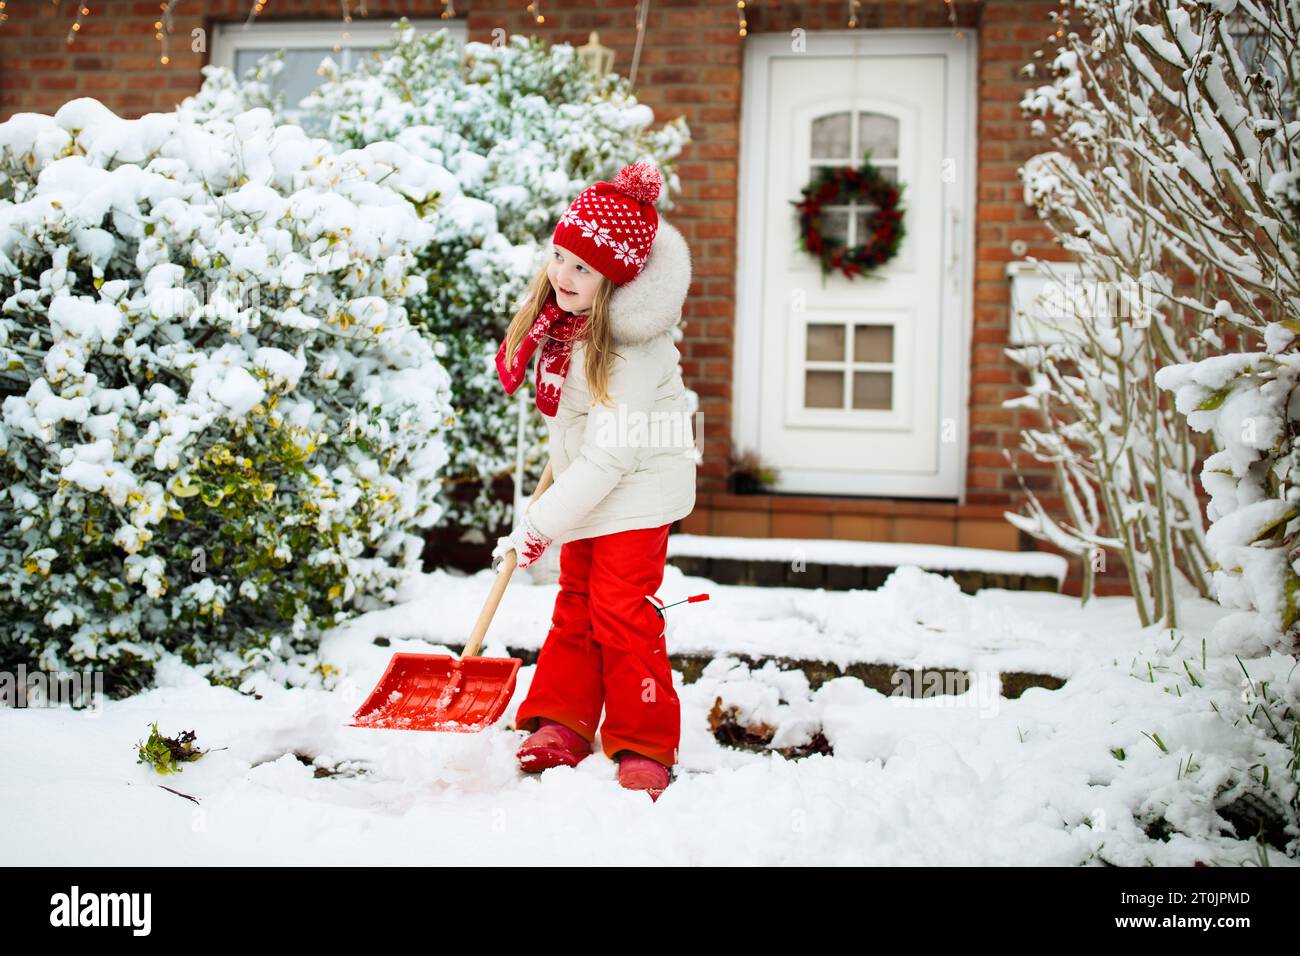 Child shoveling snow. Little girl with spade clearing driveway after winter snowstorm. Kids clear path to house door after Christmas blizzard. Stock Photo